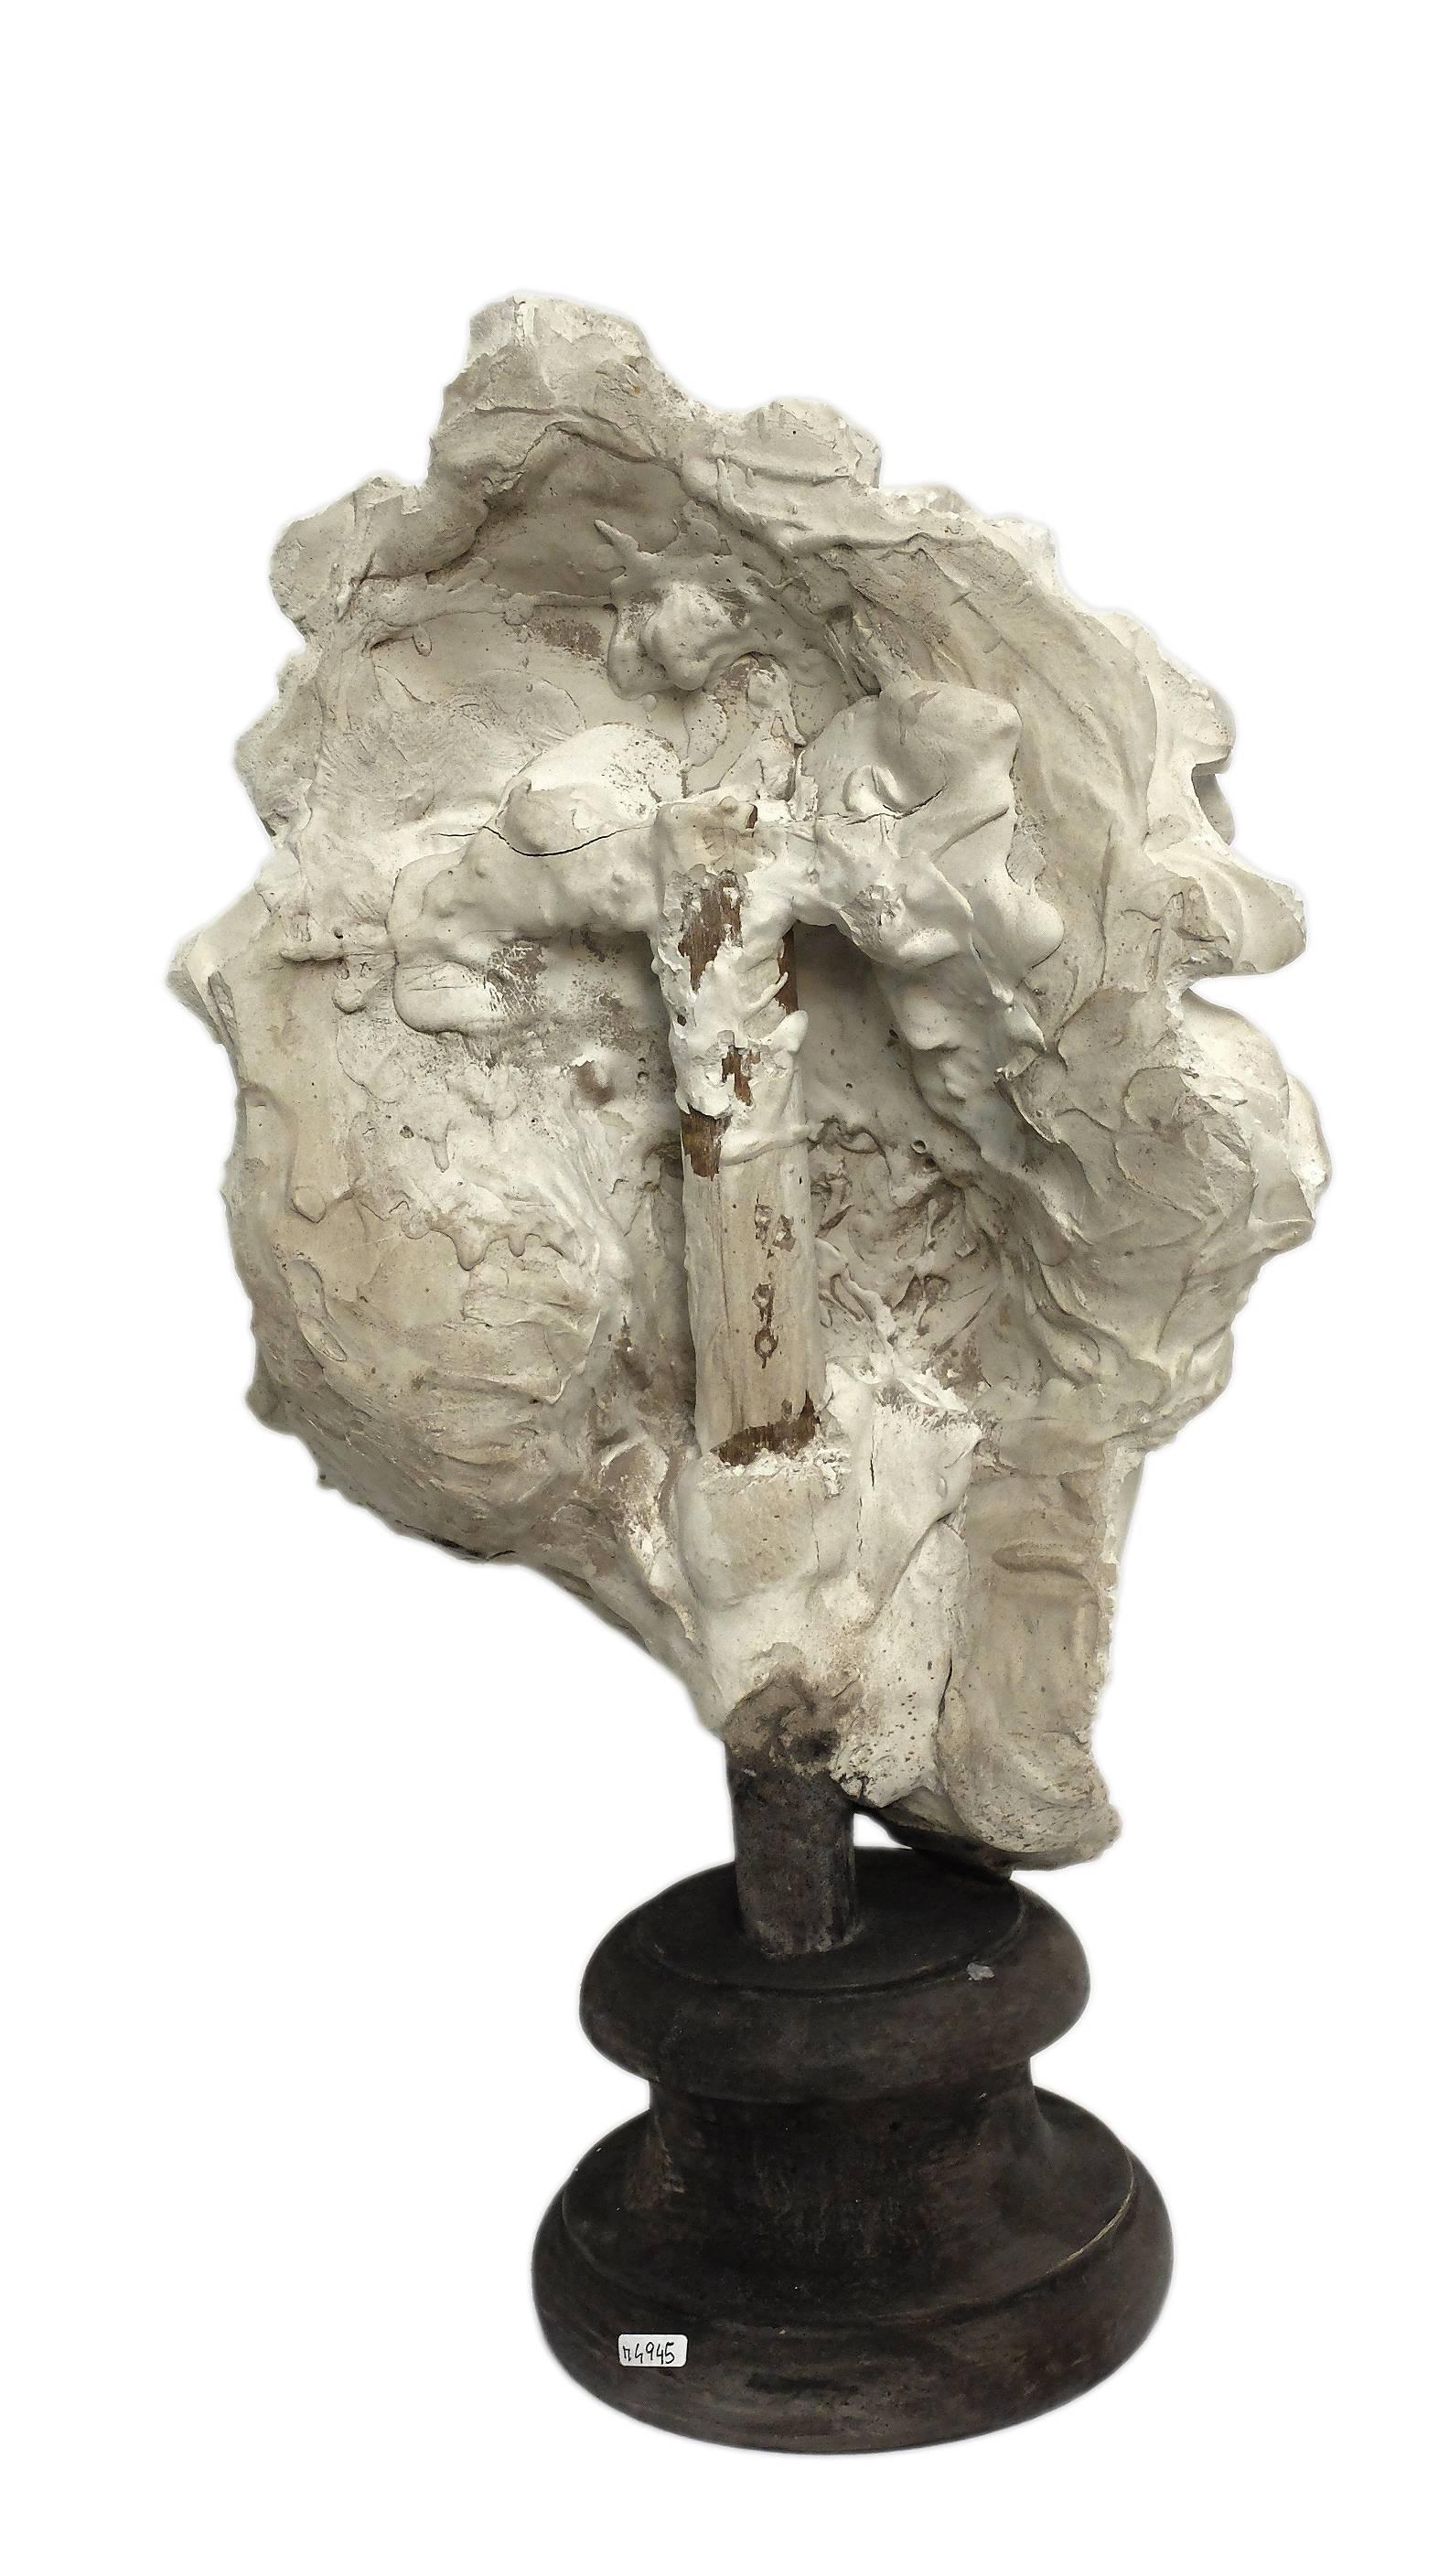 Late 19th Century Academic Cast of Plaster Depicting Laocoonte's Head